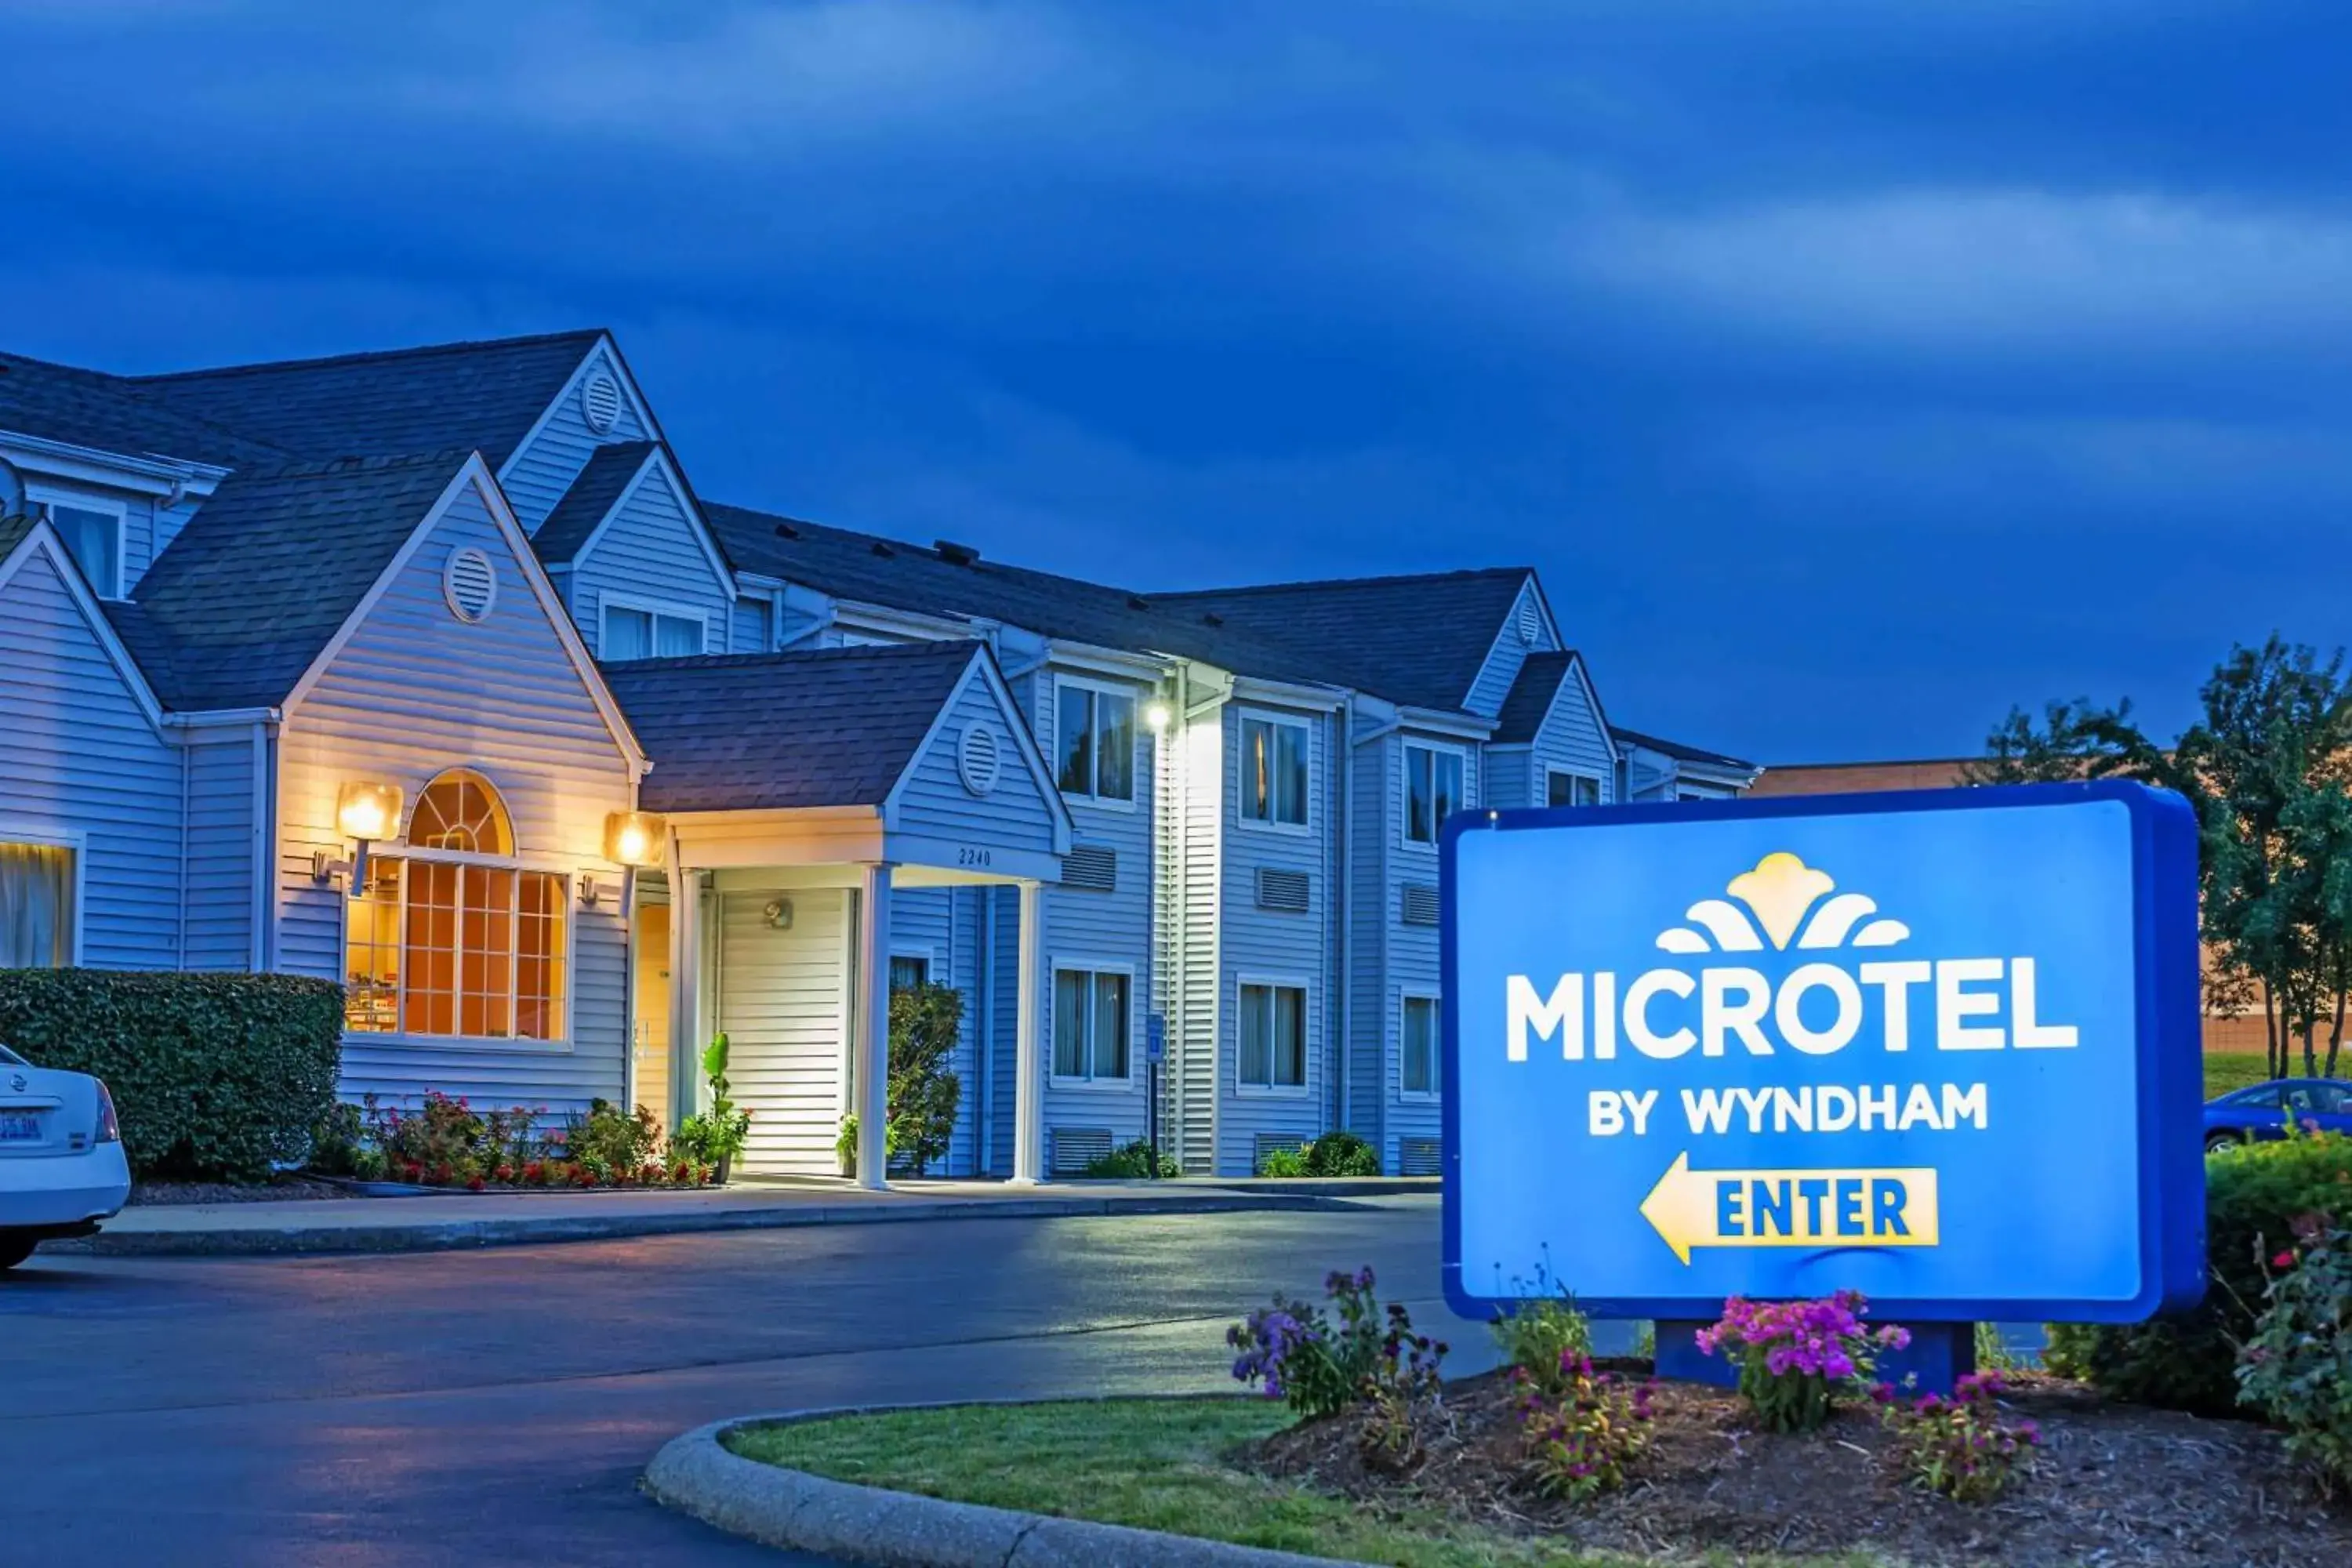 Property building in Microtel Inn by Wyndham Lexington